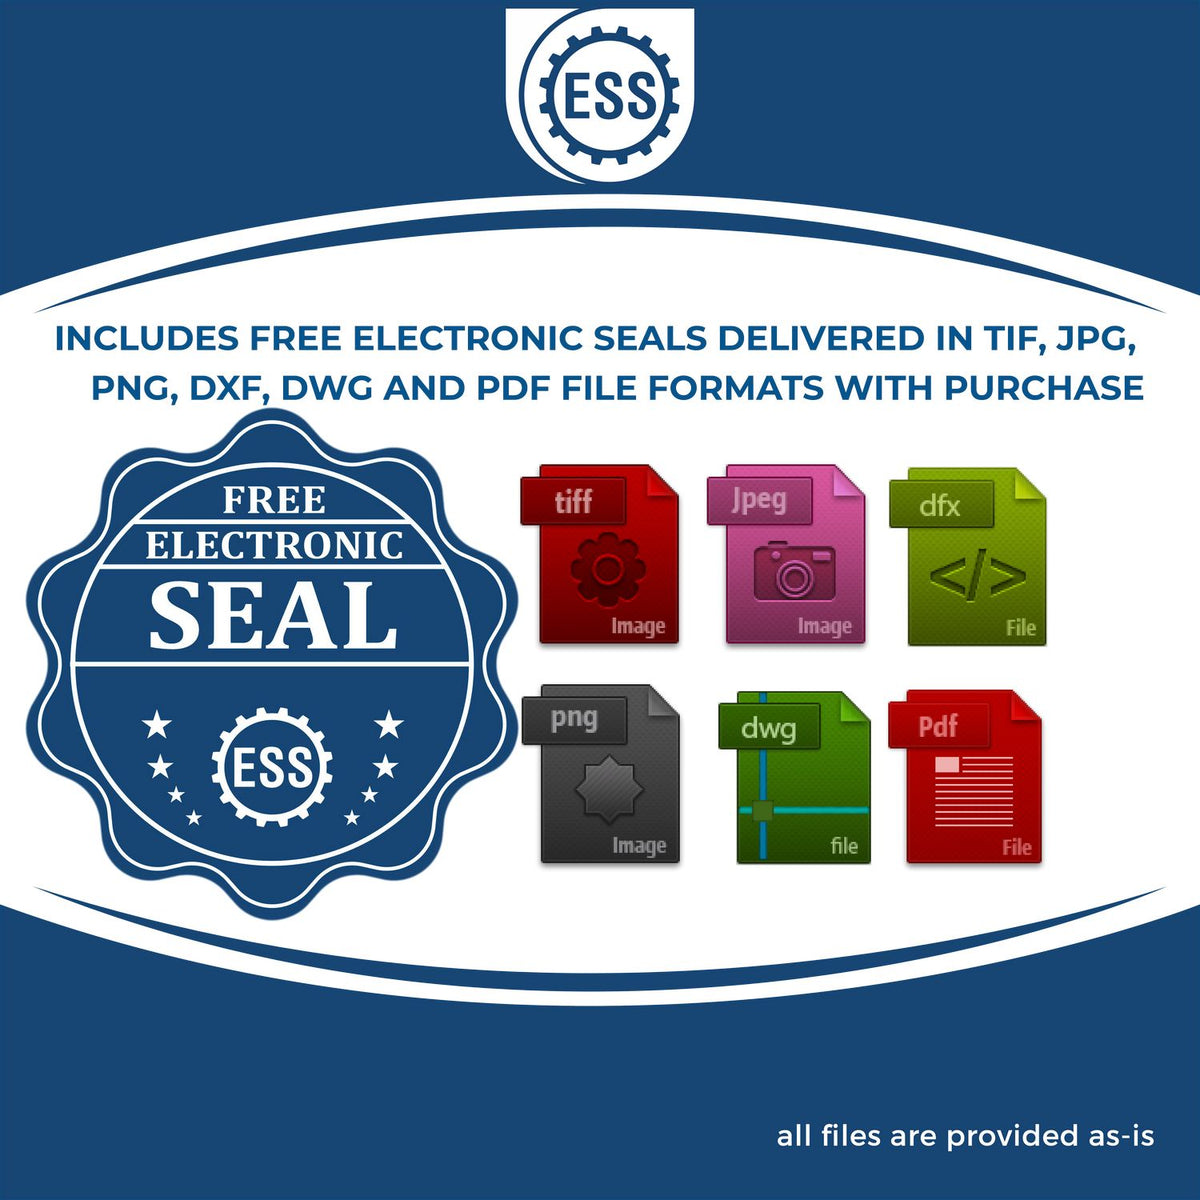 An infographic for the free electronic seal for the Long Reach Iowa Land Surveyor Seal illustrating the different file type icons such as DXF, DWG, TIF, JPG and PNG.